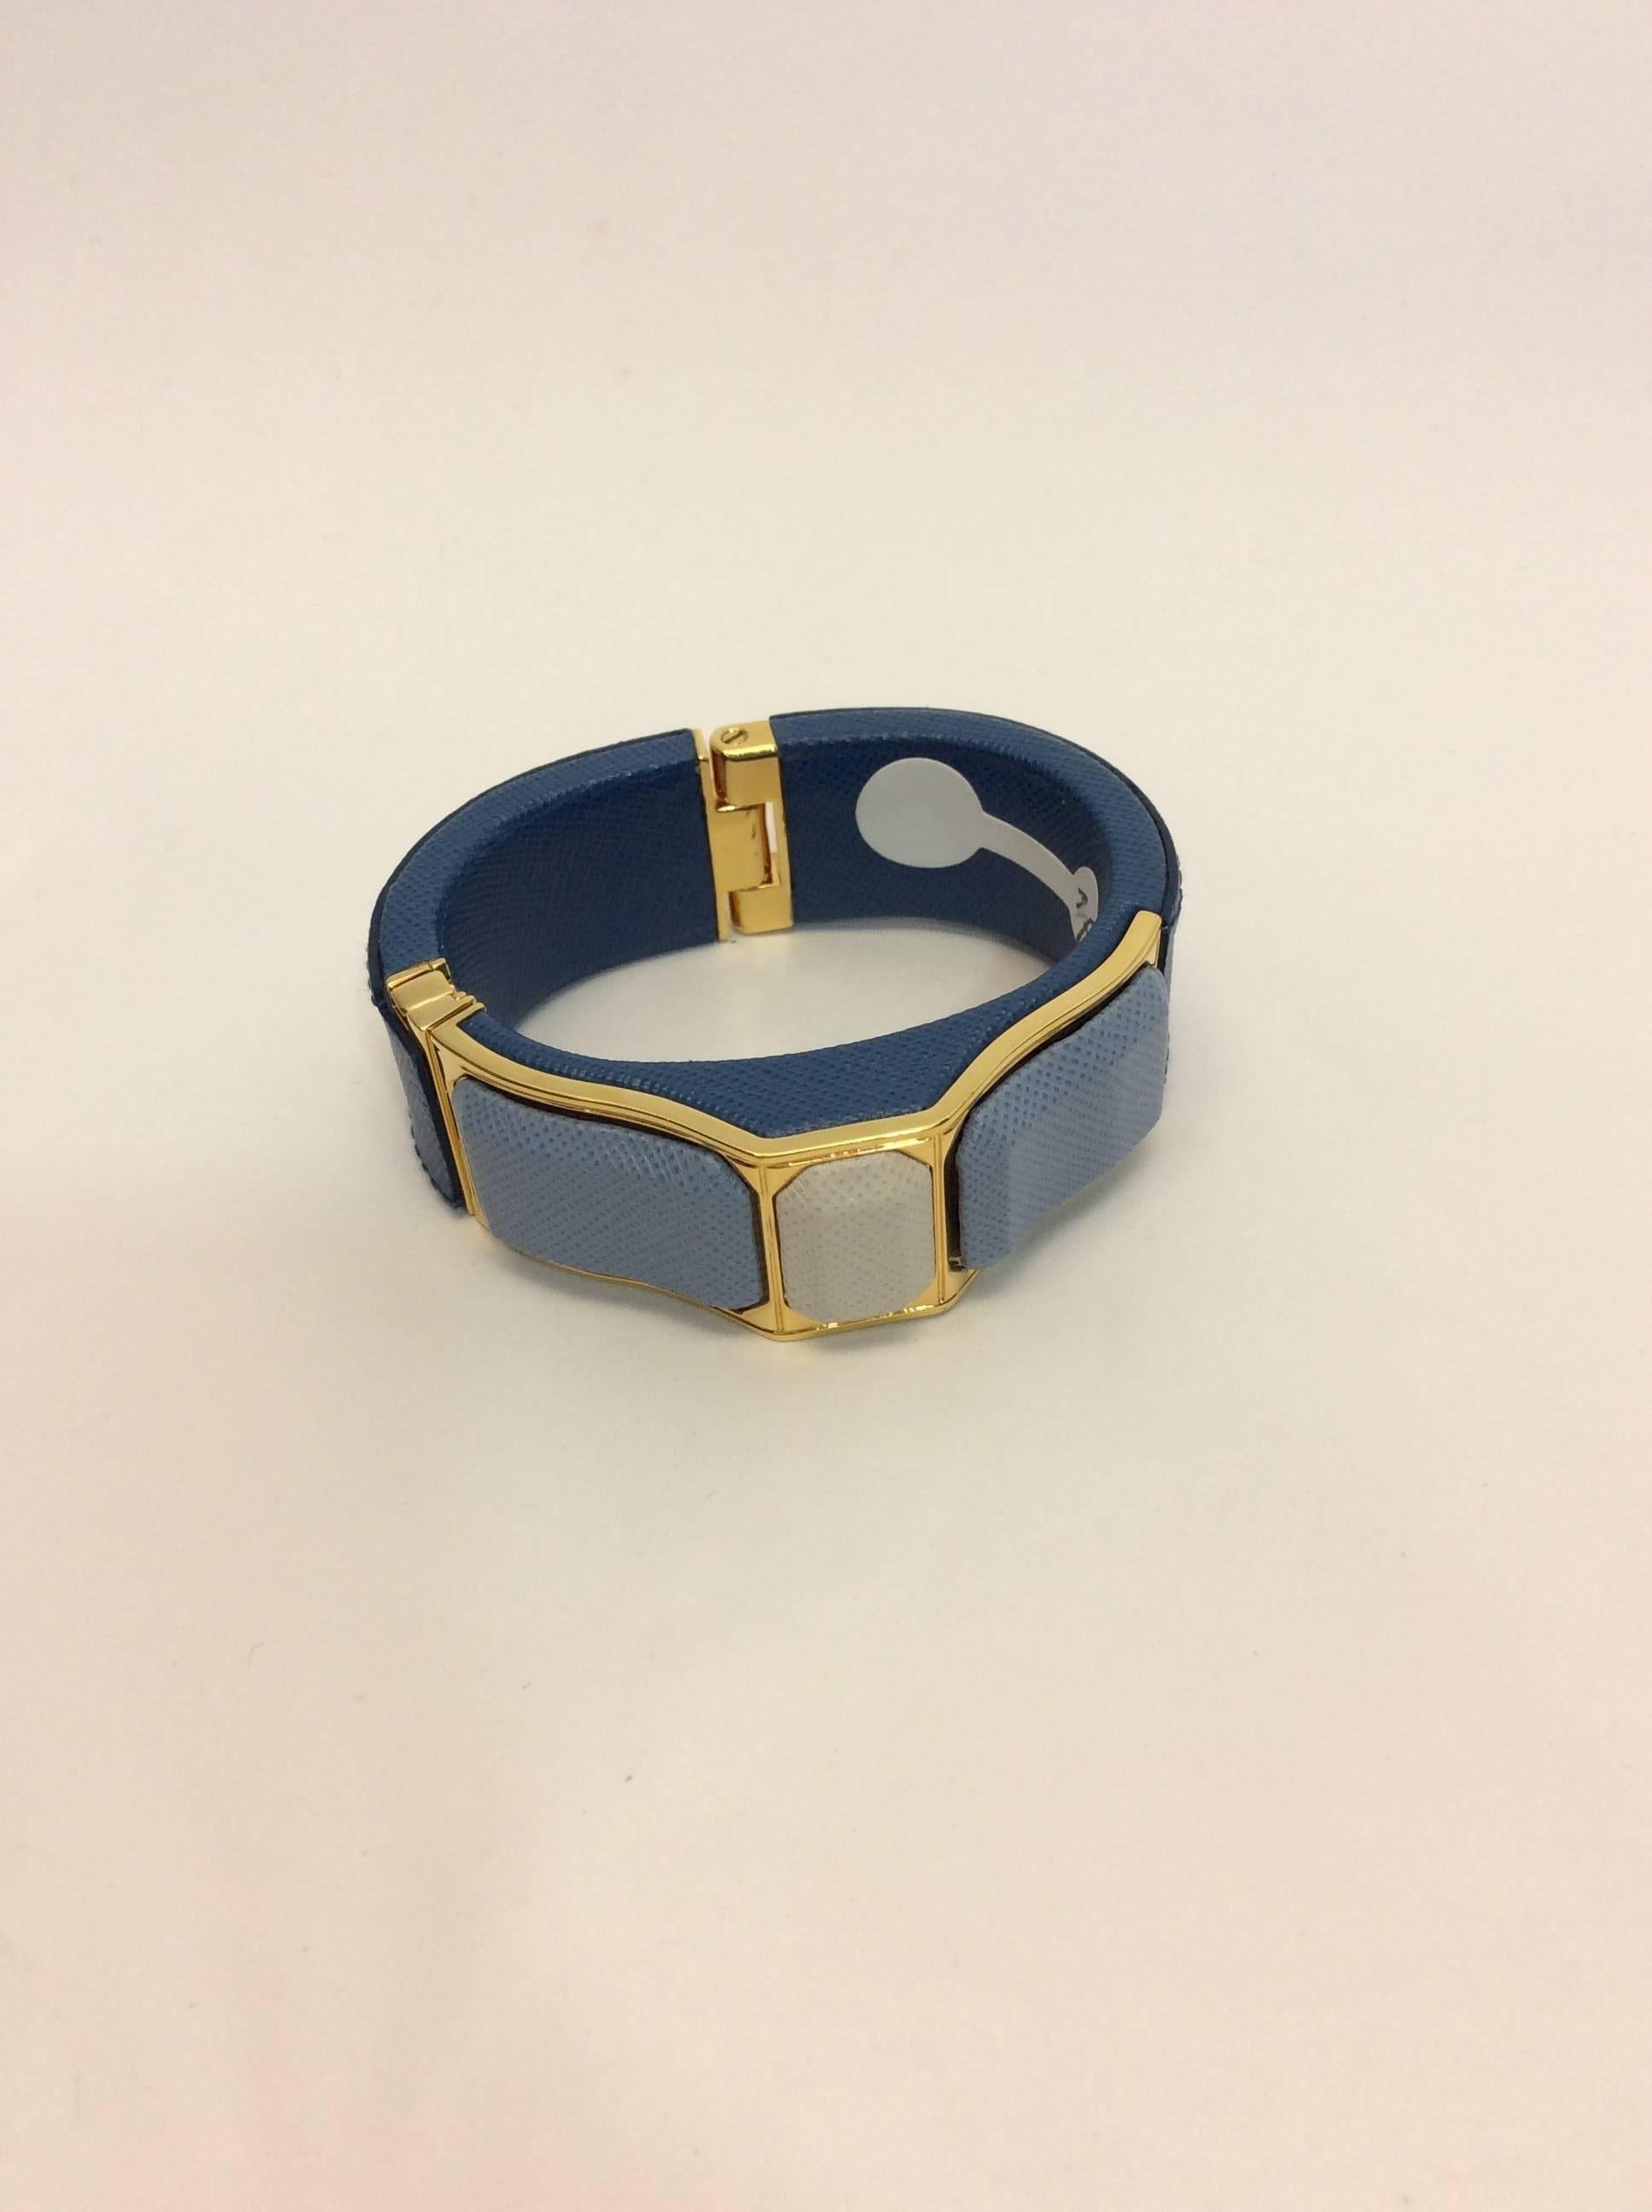 Prada Blue Leather Cuff
$350
7 inch diamete
Gold hardware
Clasp closure
Features three blue hue leather stones
Made in Italy